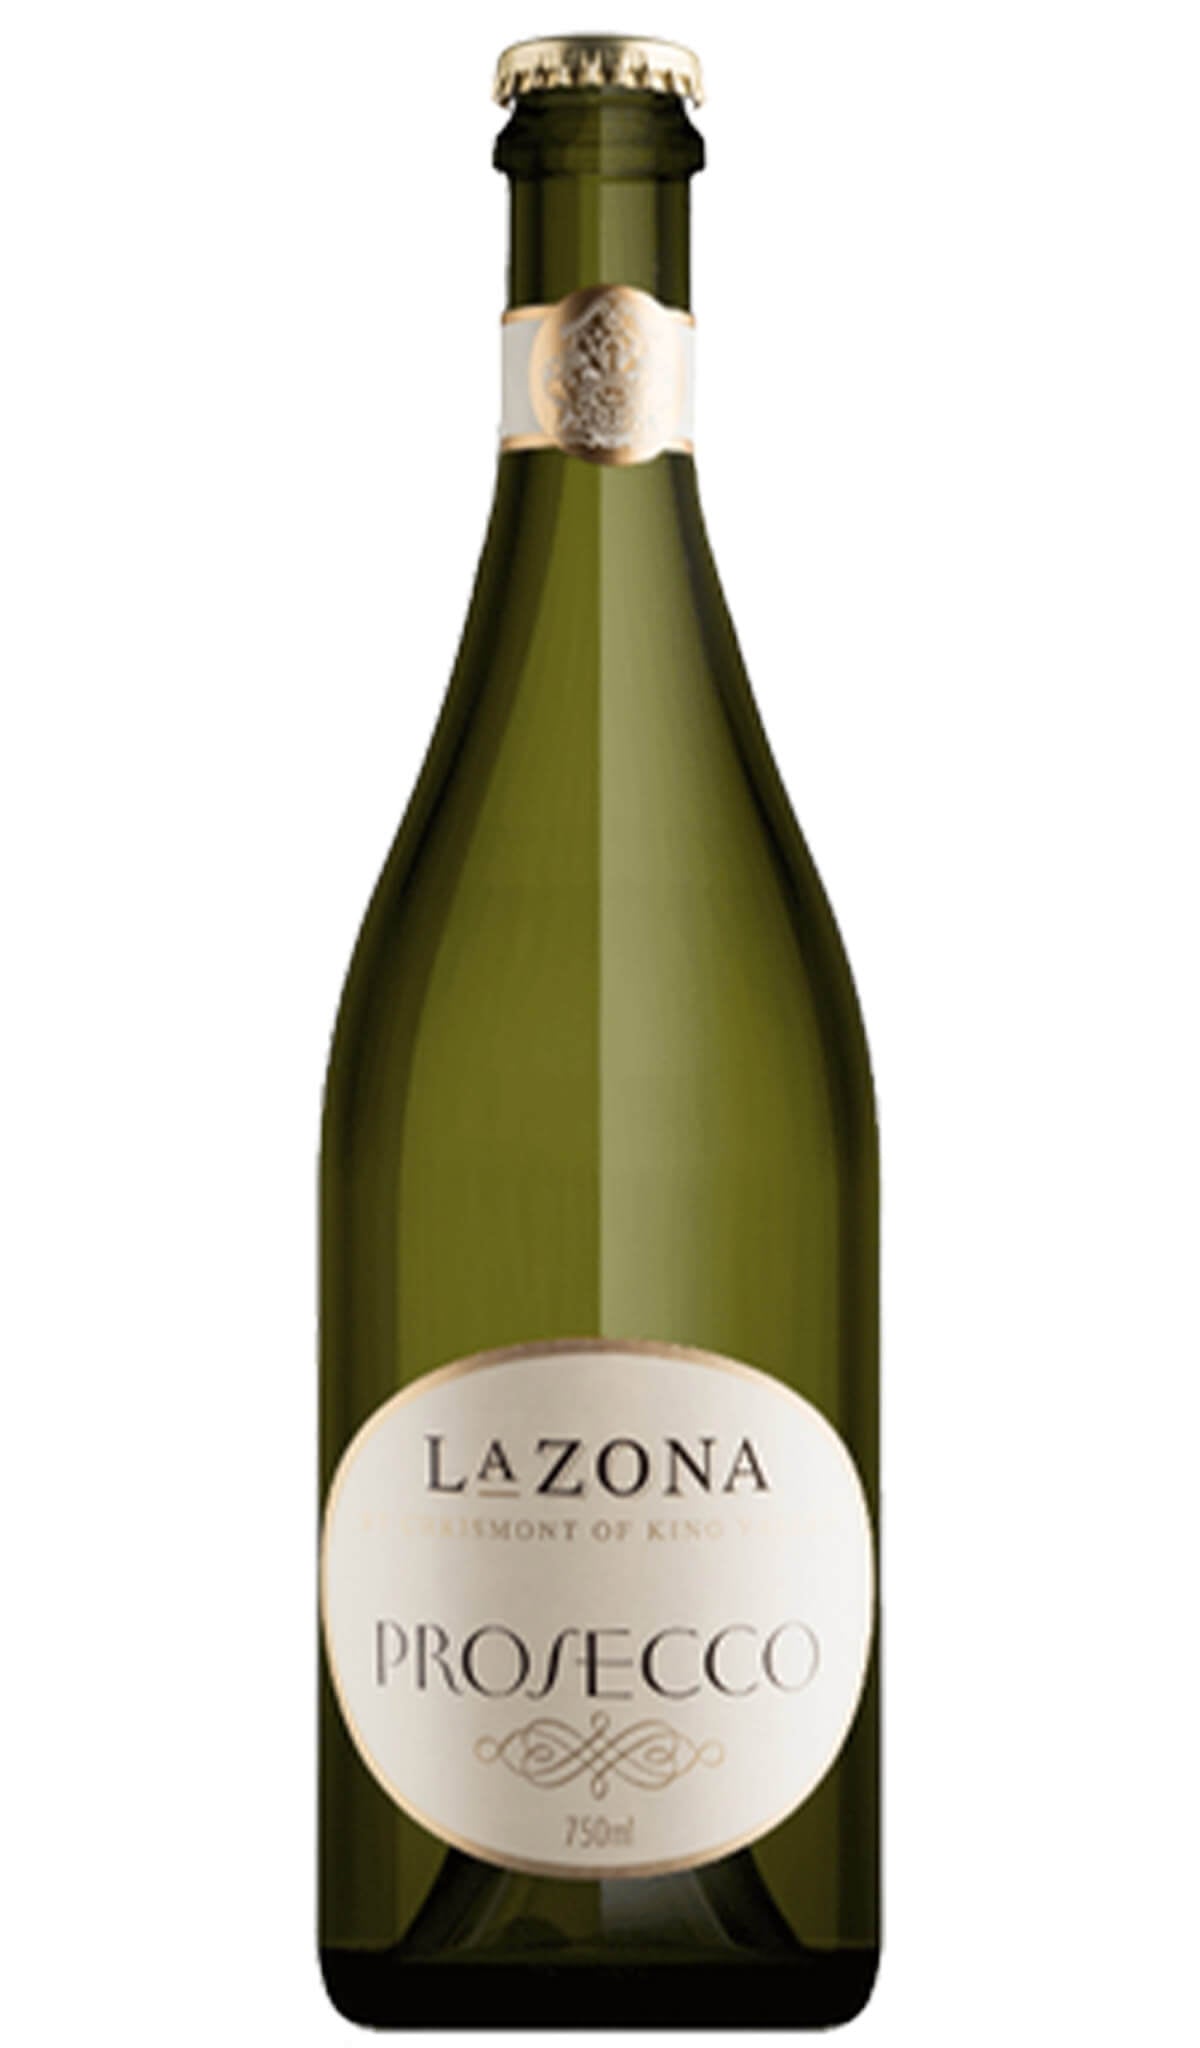 Find out more or buy Chrismont King Valley La Zona Prosecco NV online at Wine Sellers Direct - Australia’s independent liquor specialists.